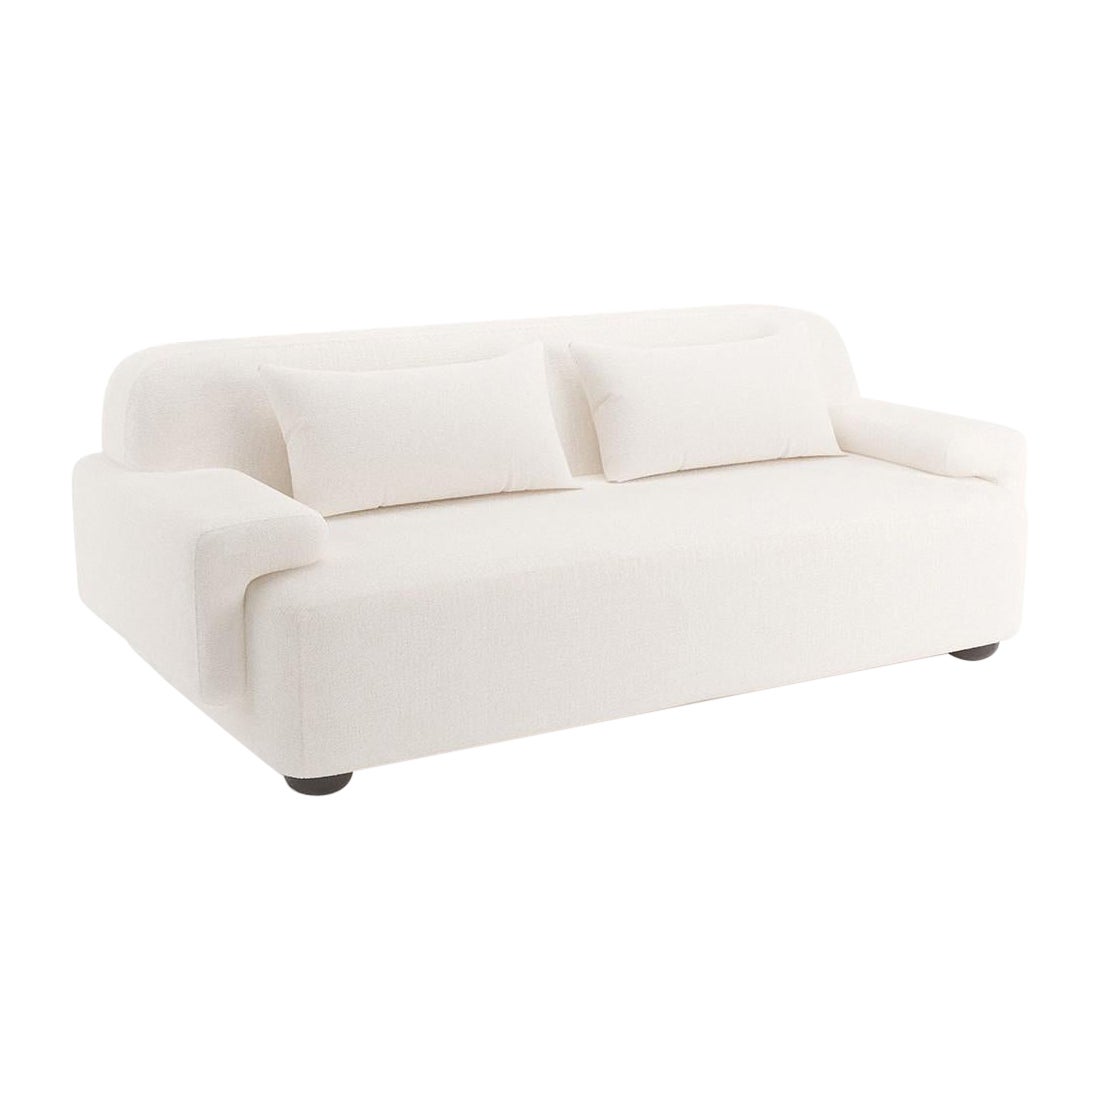 Popus Editions Lena 2.5 Seater Sofa in Egg Shell Off-white Malmoe Terry Fabric For Sale